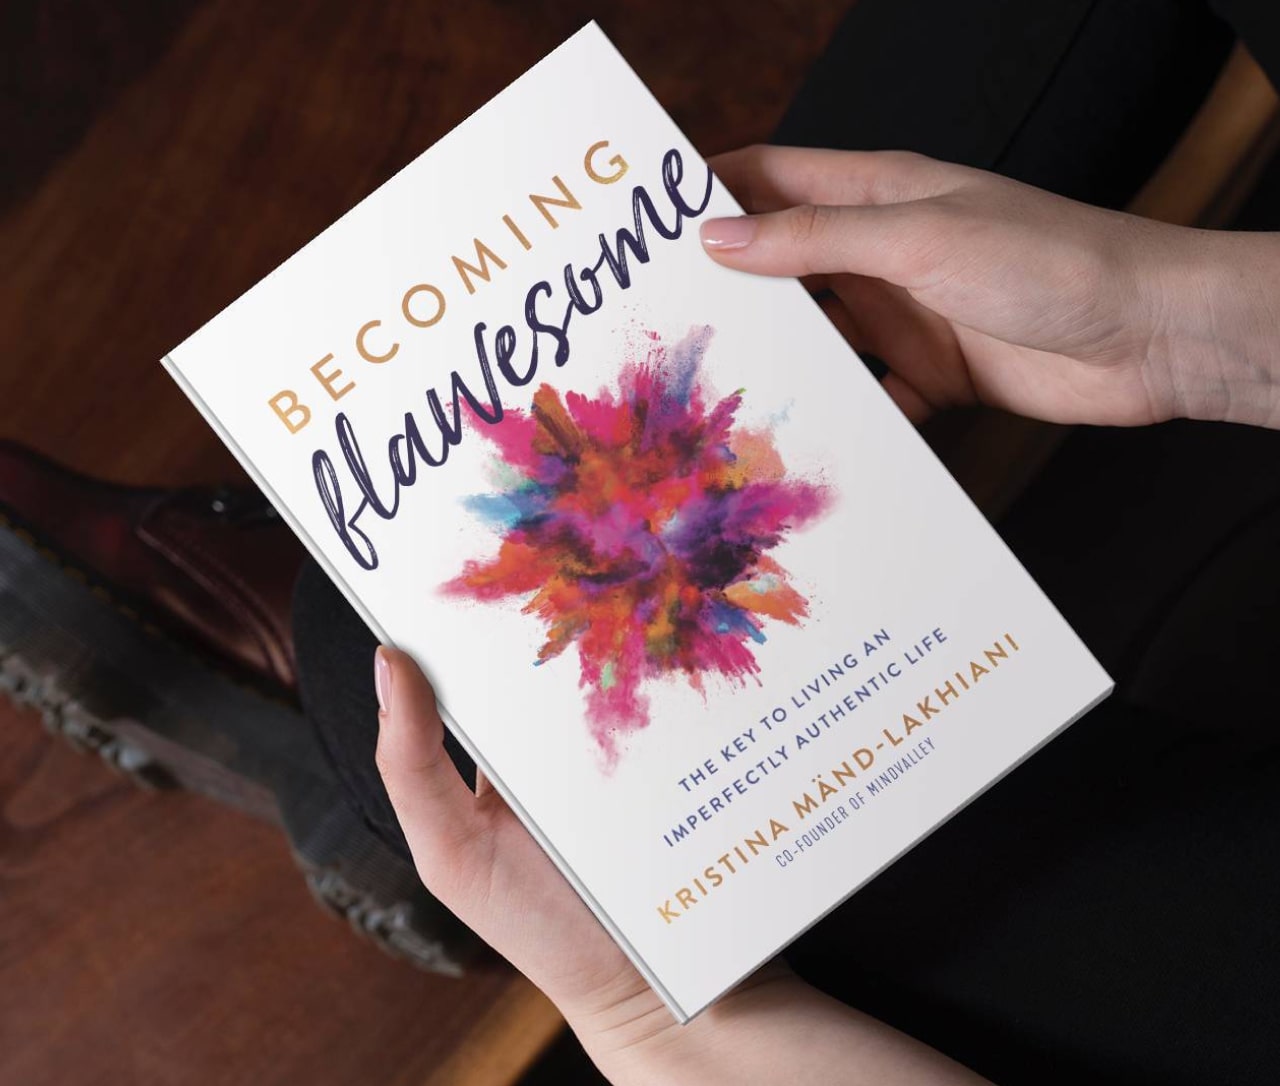 #Becoming Flawesome